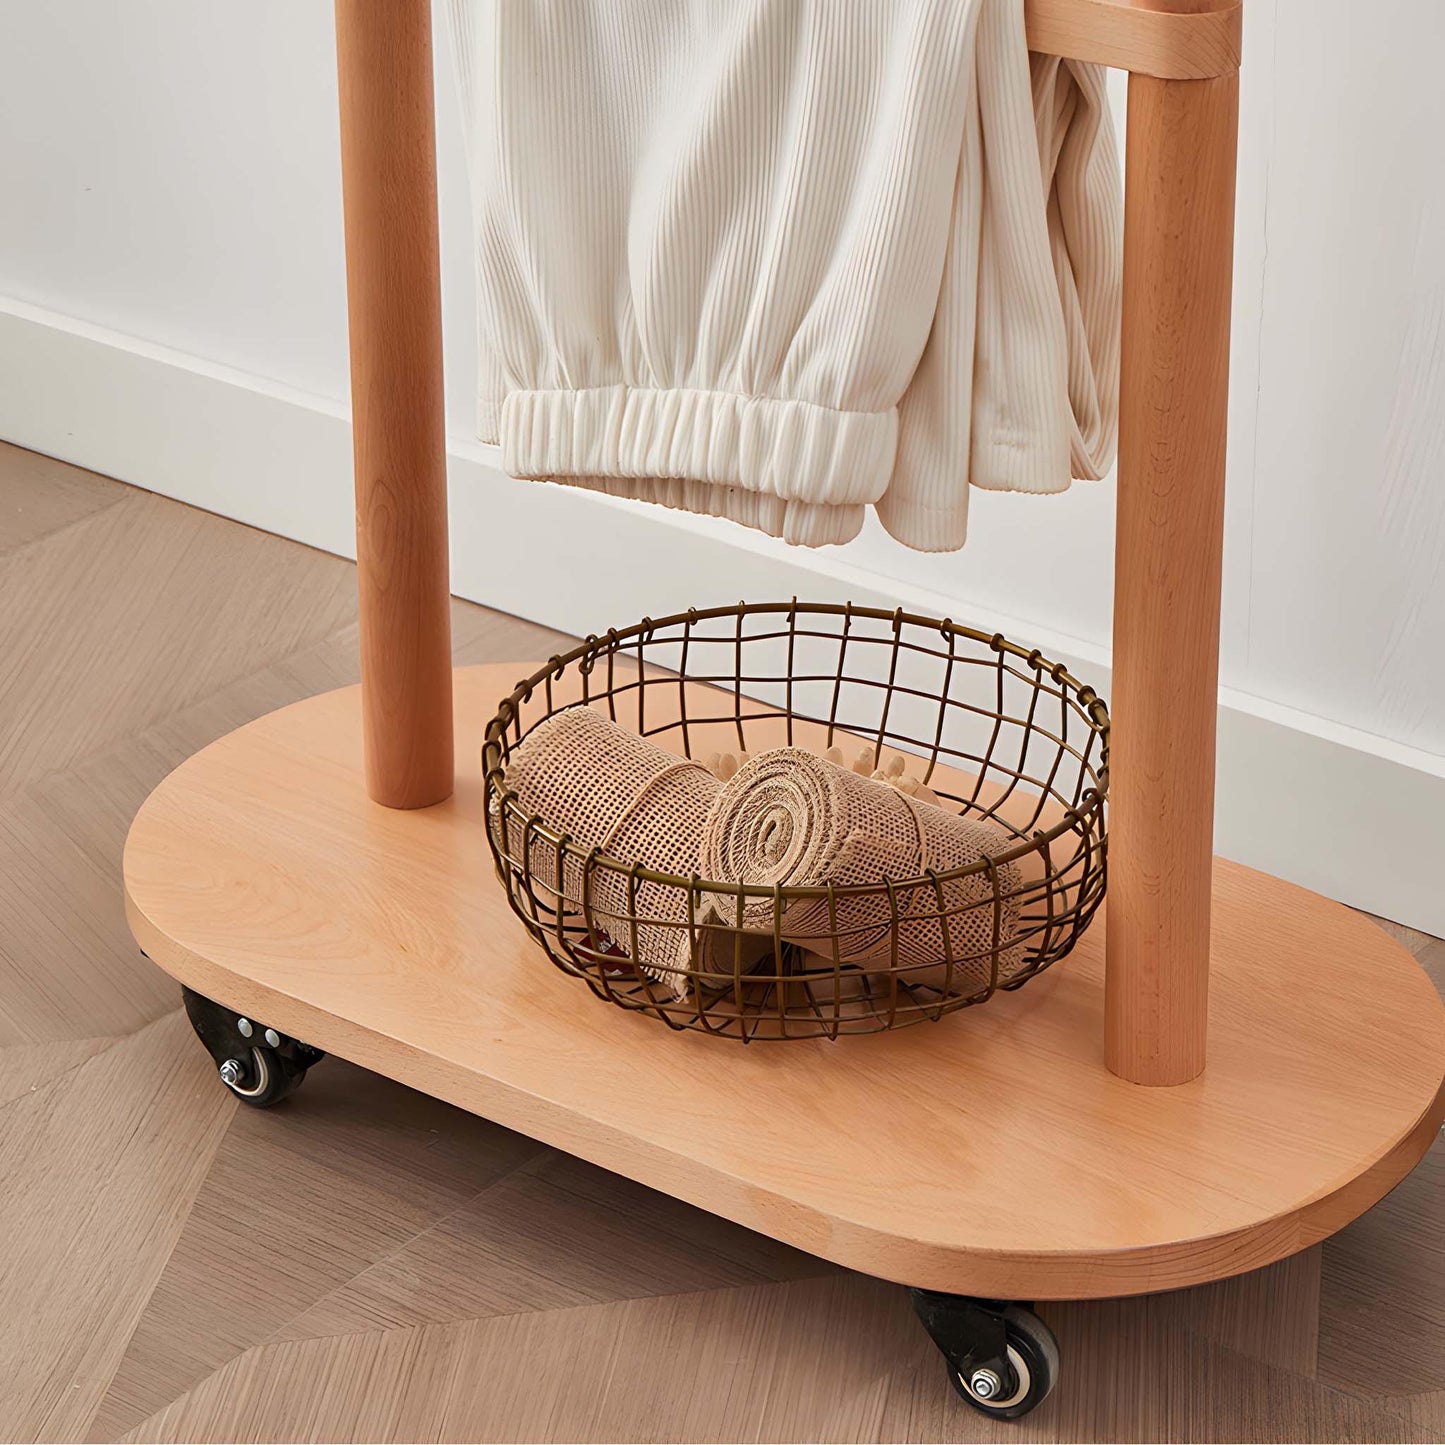 Mobile Wooden Coat Rack - Stylish and Convenient Clothing Organizer